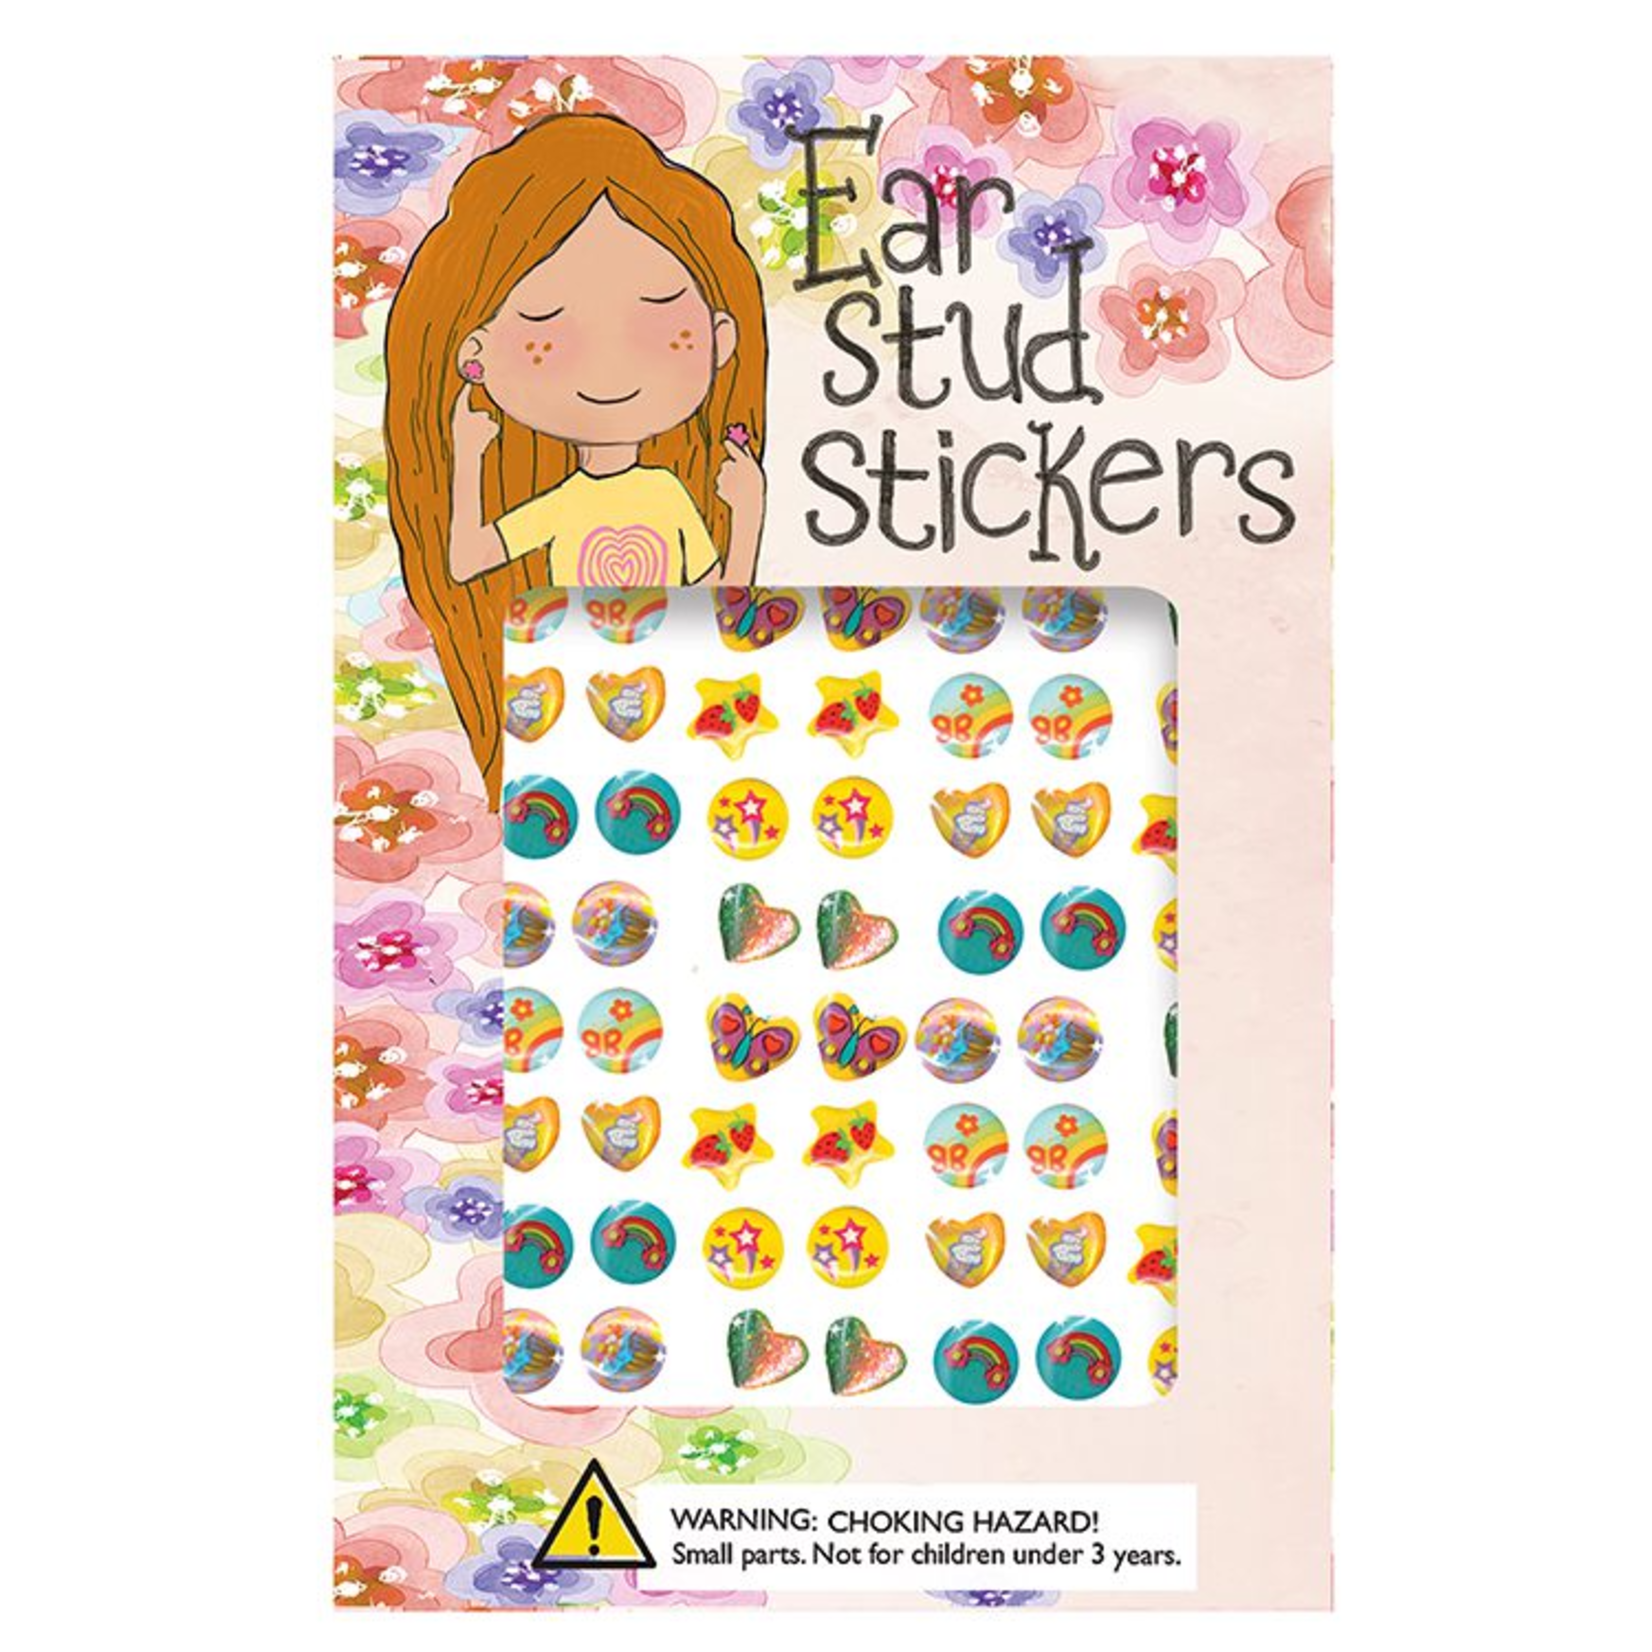 House of Marbles Ear Stud Stickers